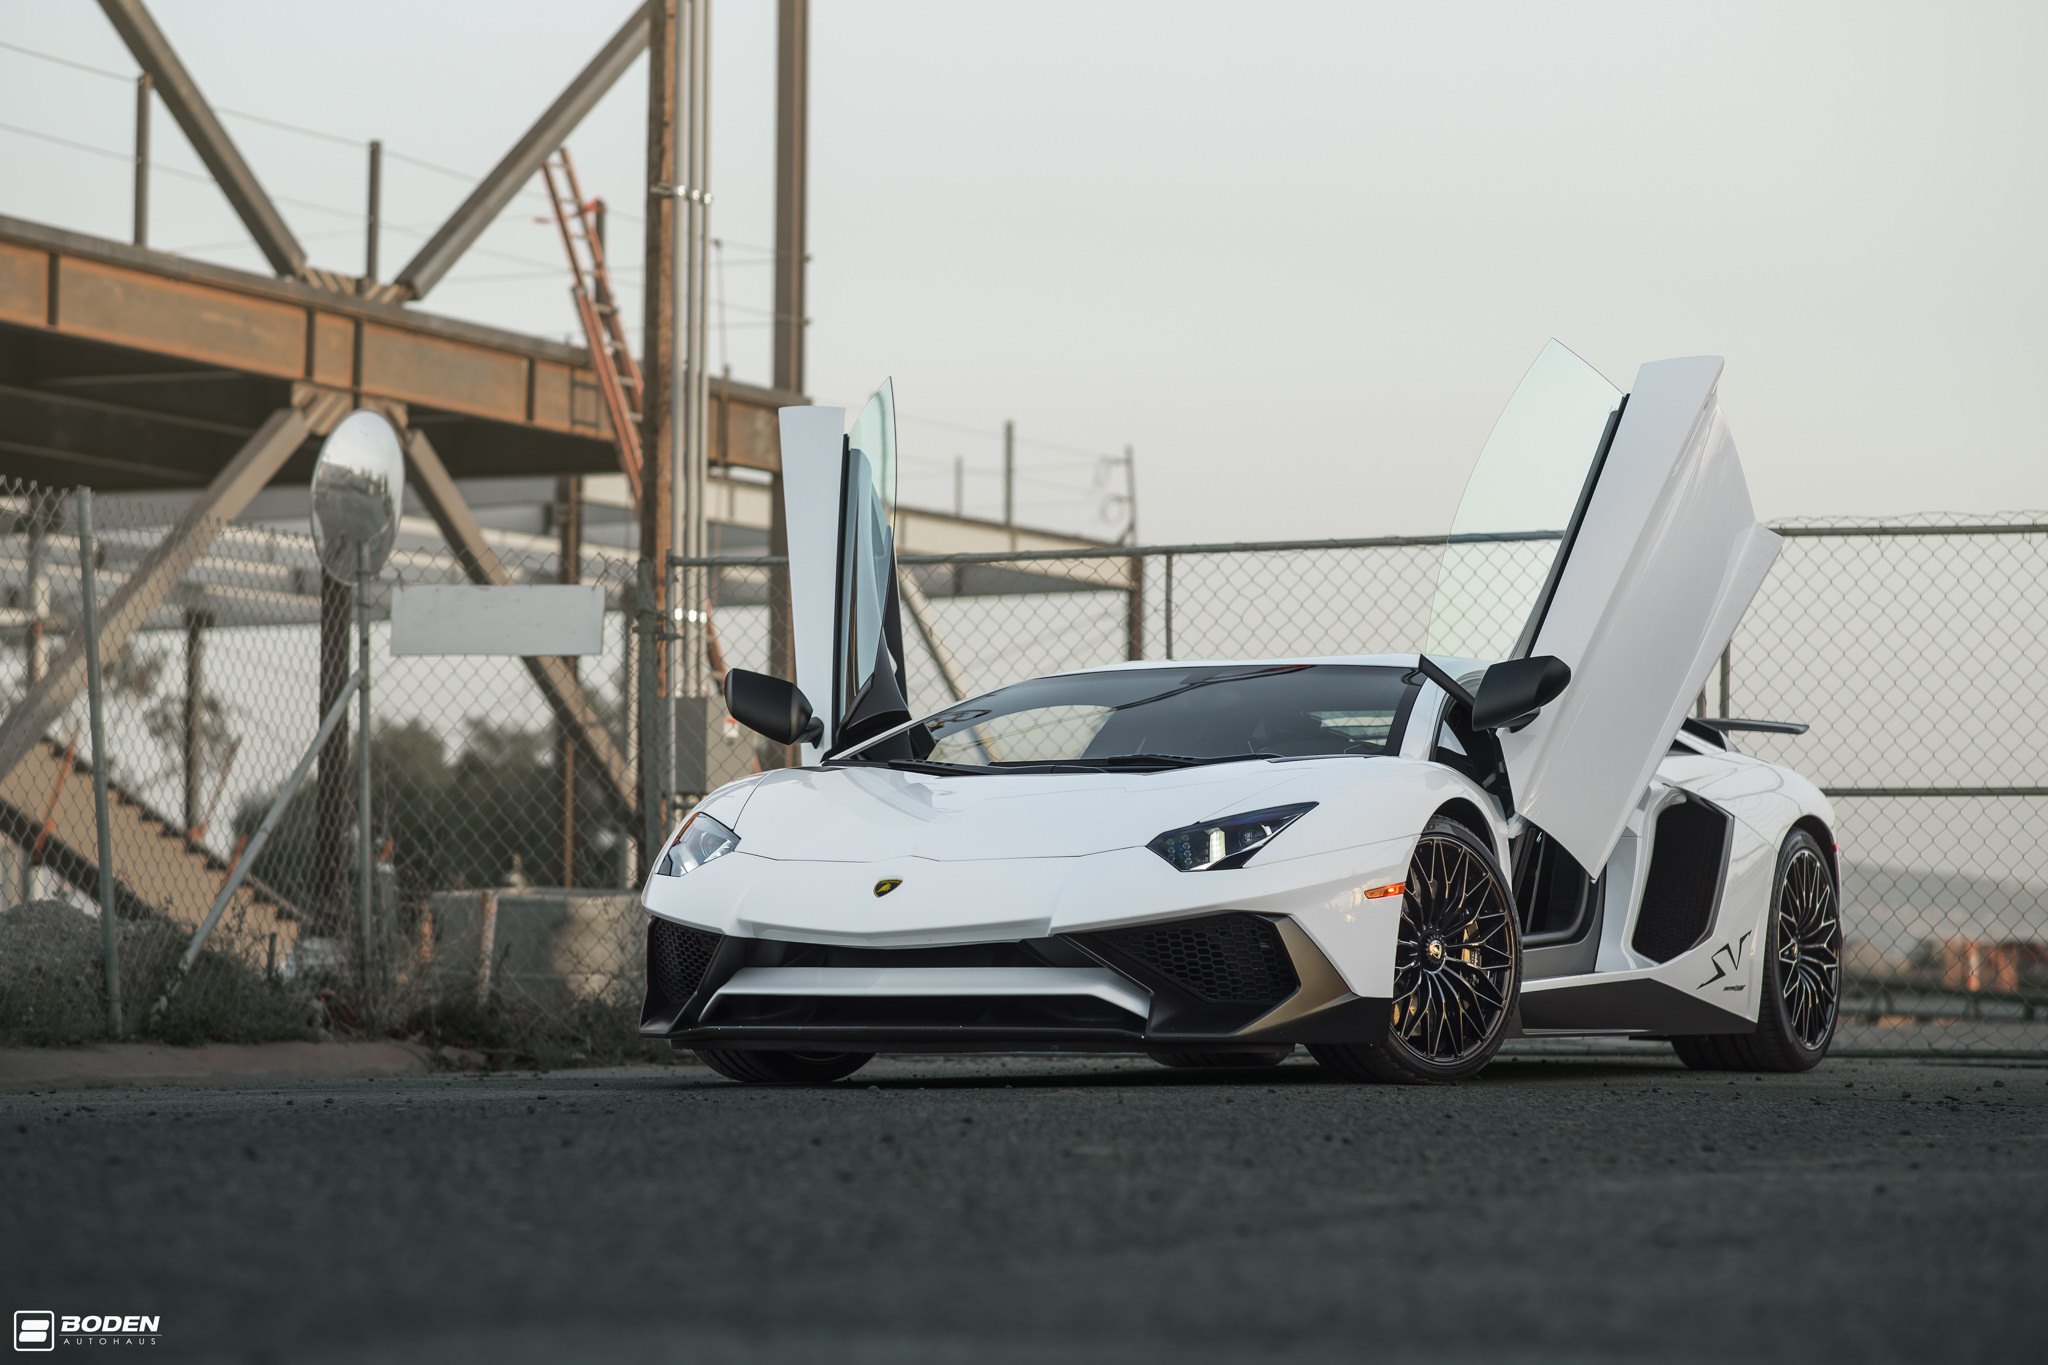 White Lamborghini Aventador with Vertical Doors - Photo by Boden Autohaus